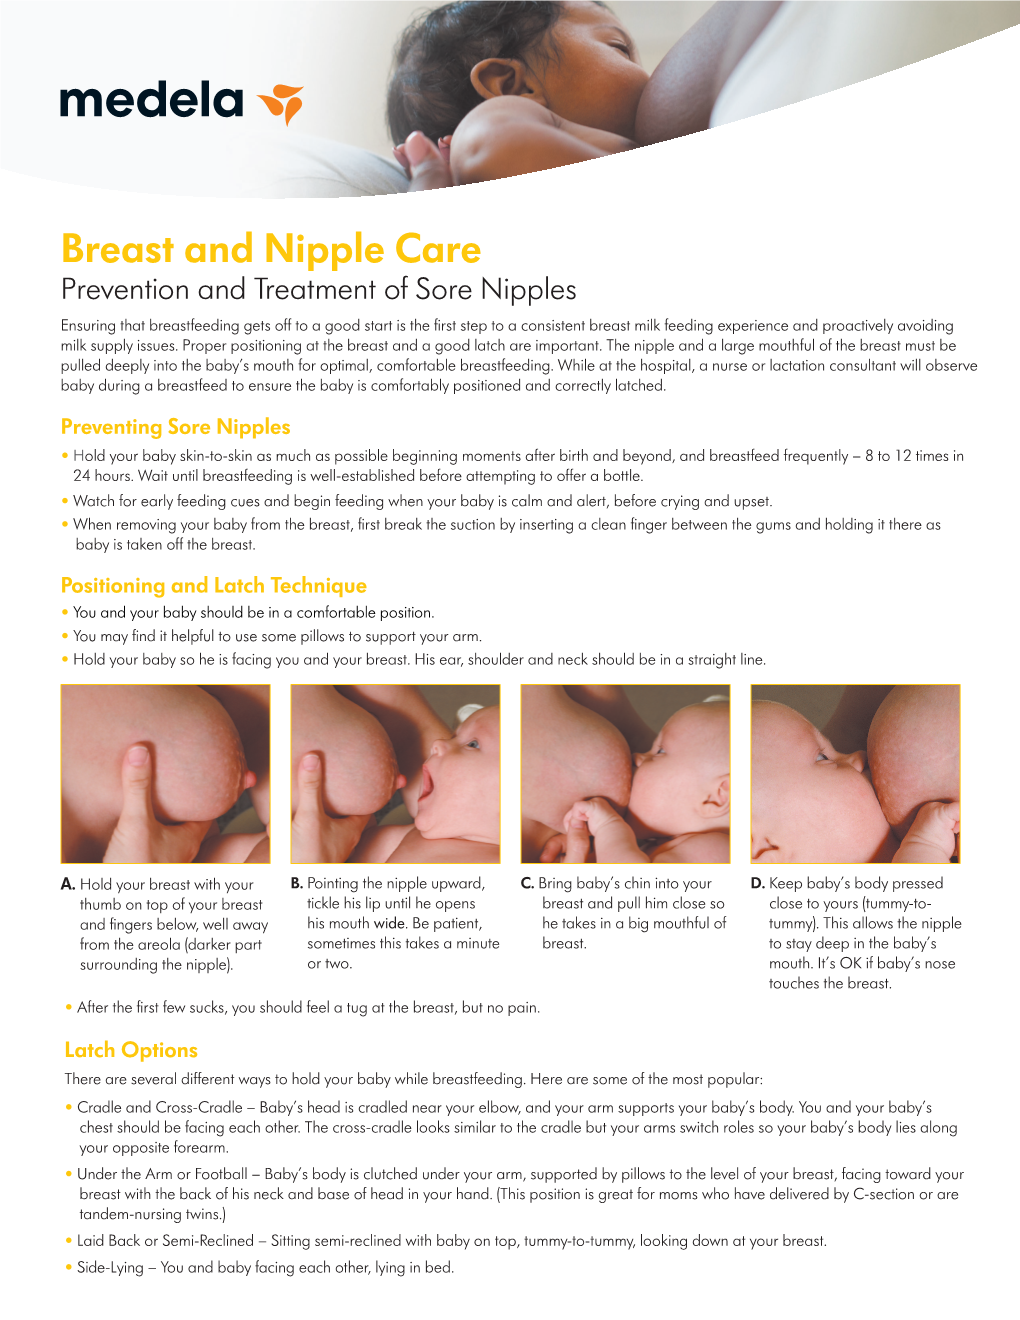 Breast and Nipple Care